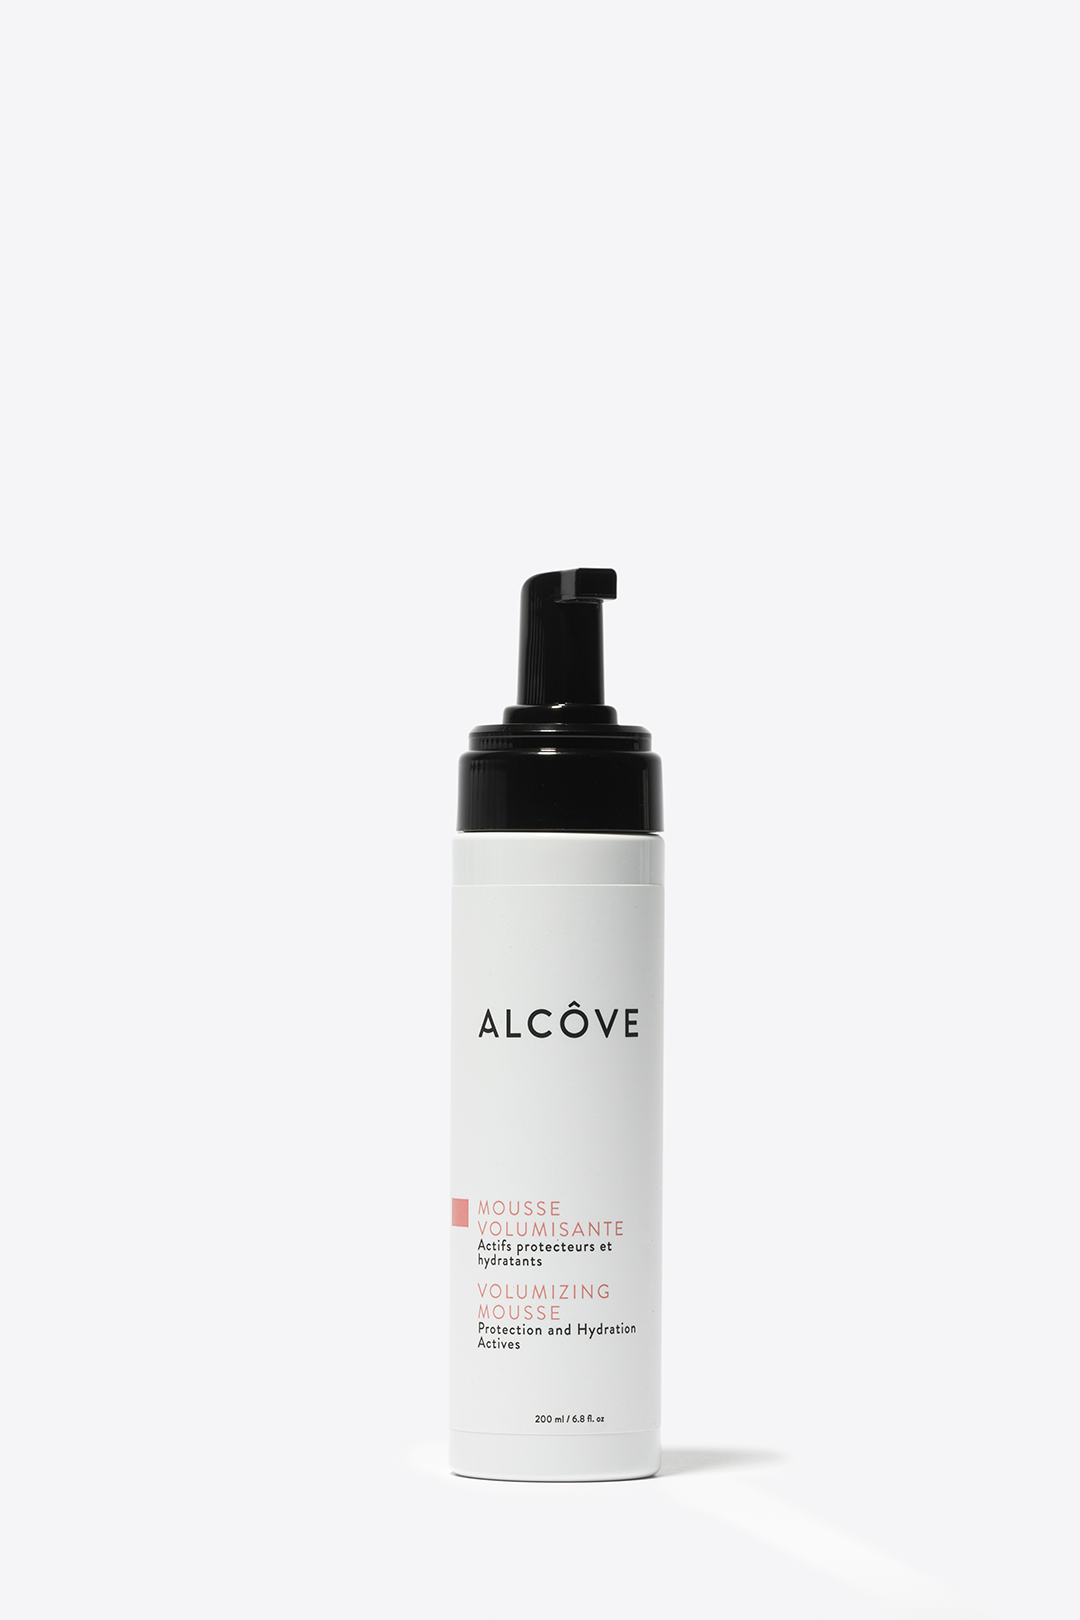 Alcove - VOLUMIZING MOUSSE - by Alcove |ProCare Outlet|